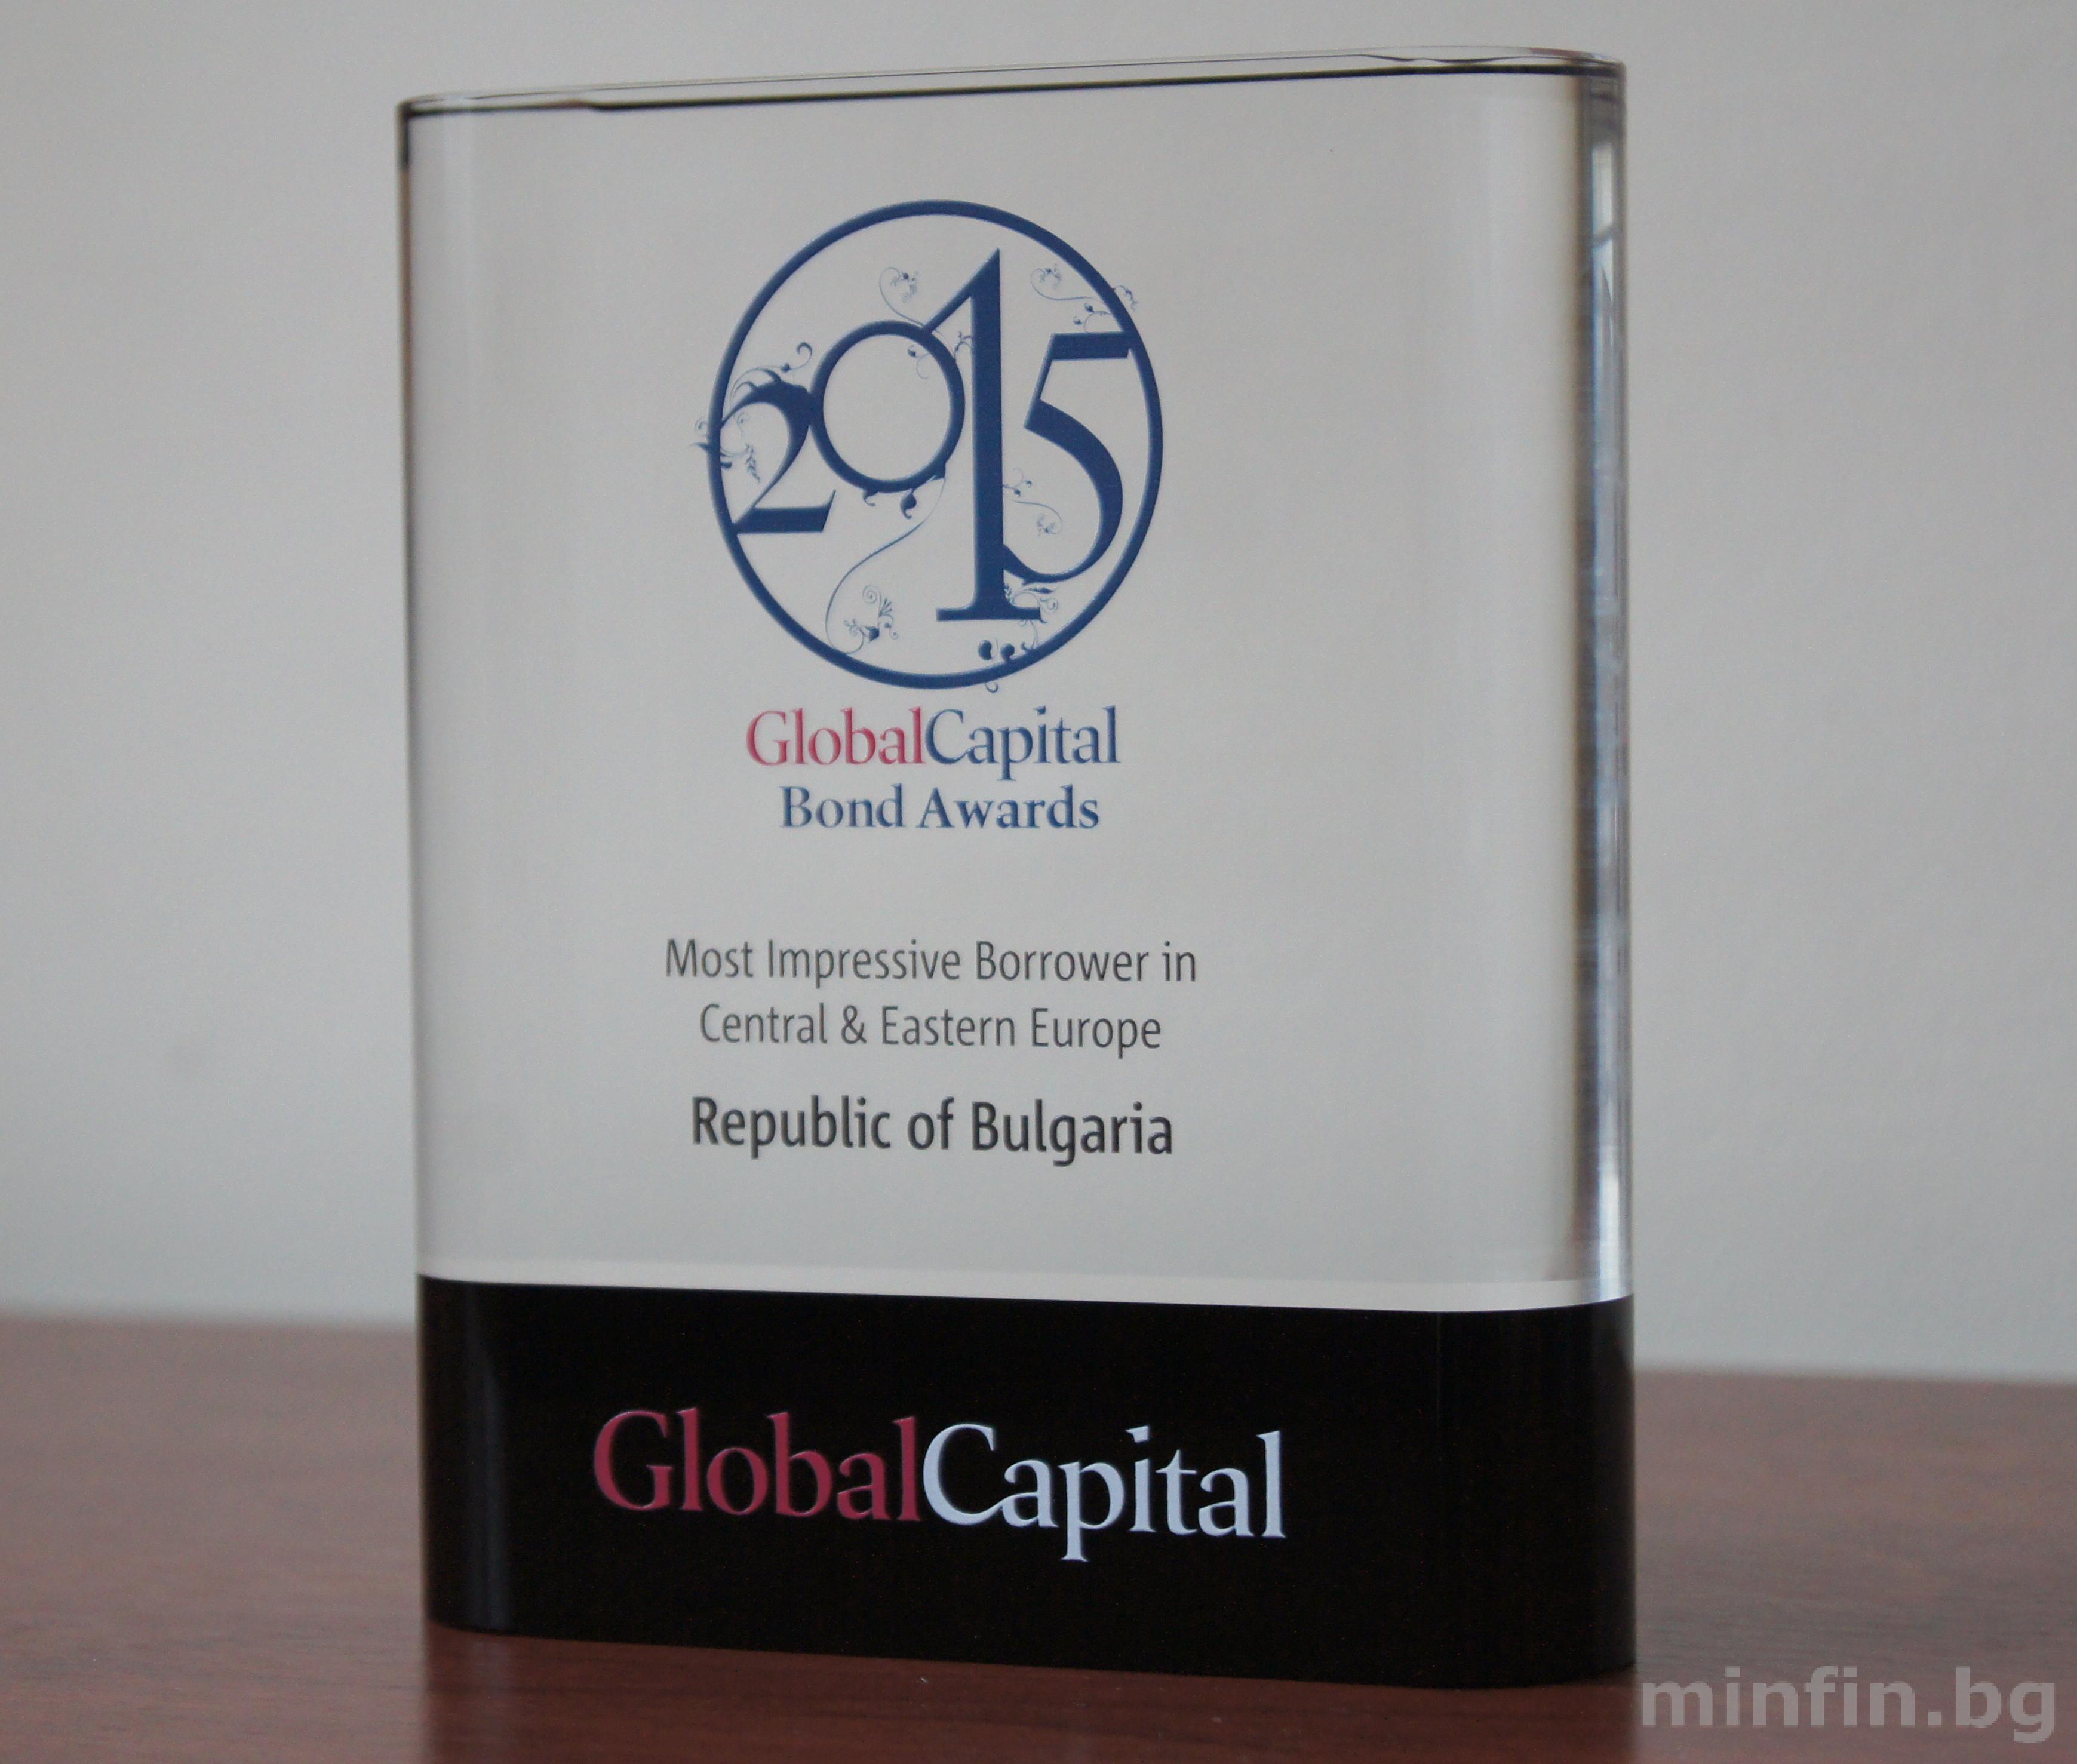 BULGARIA IS "MOST IMPRESSIVE BORROWER IN CENTRAL & EASTERN EUROPE" IN THE ANNUAL CLASSIFICATION OF GLOBALCAPITAL